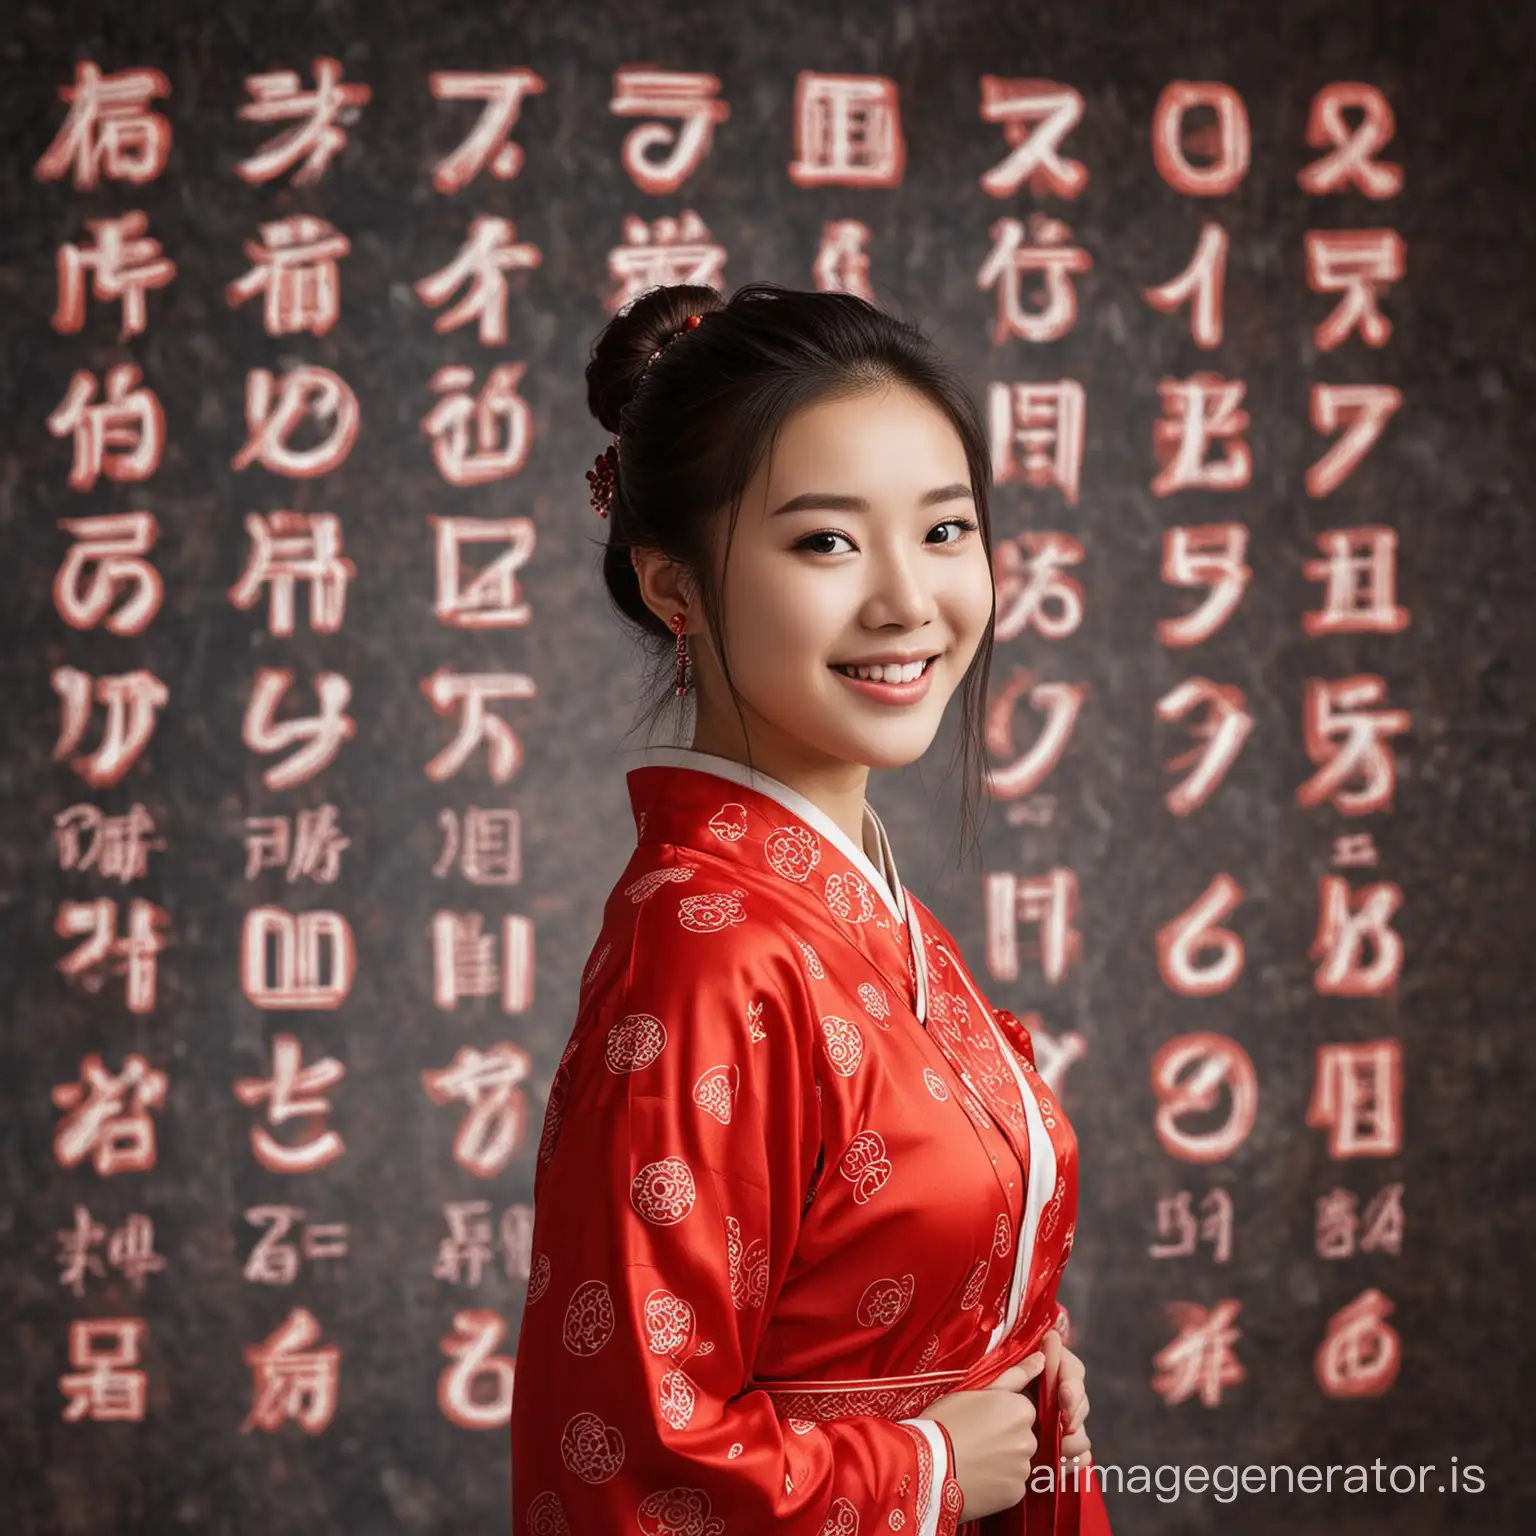 Extremely beautiful Chinese girl, Cheerful face, Standing among the numbers, Chinese culture, Lucky number symbols, unlucky number symbols